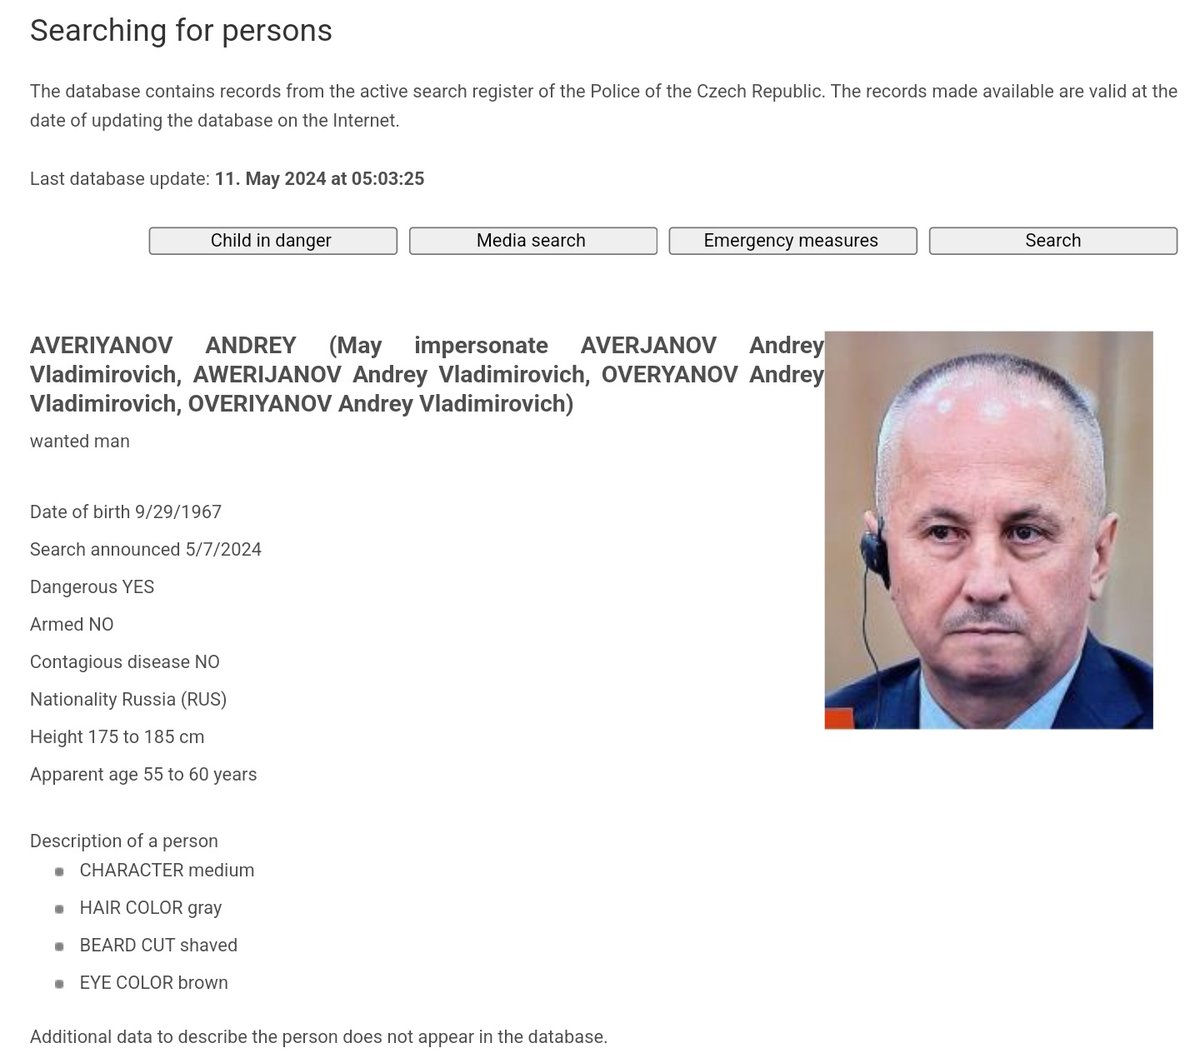 Czech authorities place Andrei Averyanov, Russia's assassination and sabotage czar and dirty old pervert Andrey Averyanov on the Most Wanted list over organizing the explosions in Vrbetice. @the_ins_ru , @bellingcat and @derspiegel first discovered his involvement in this…